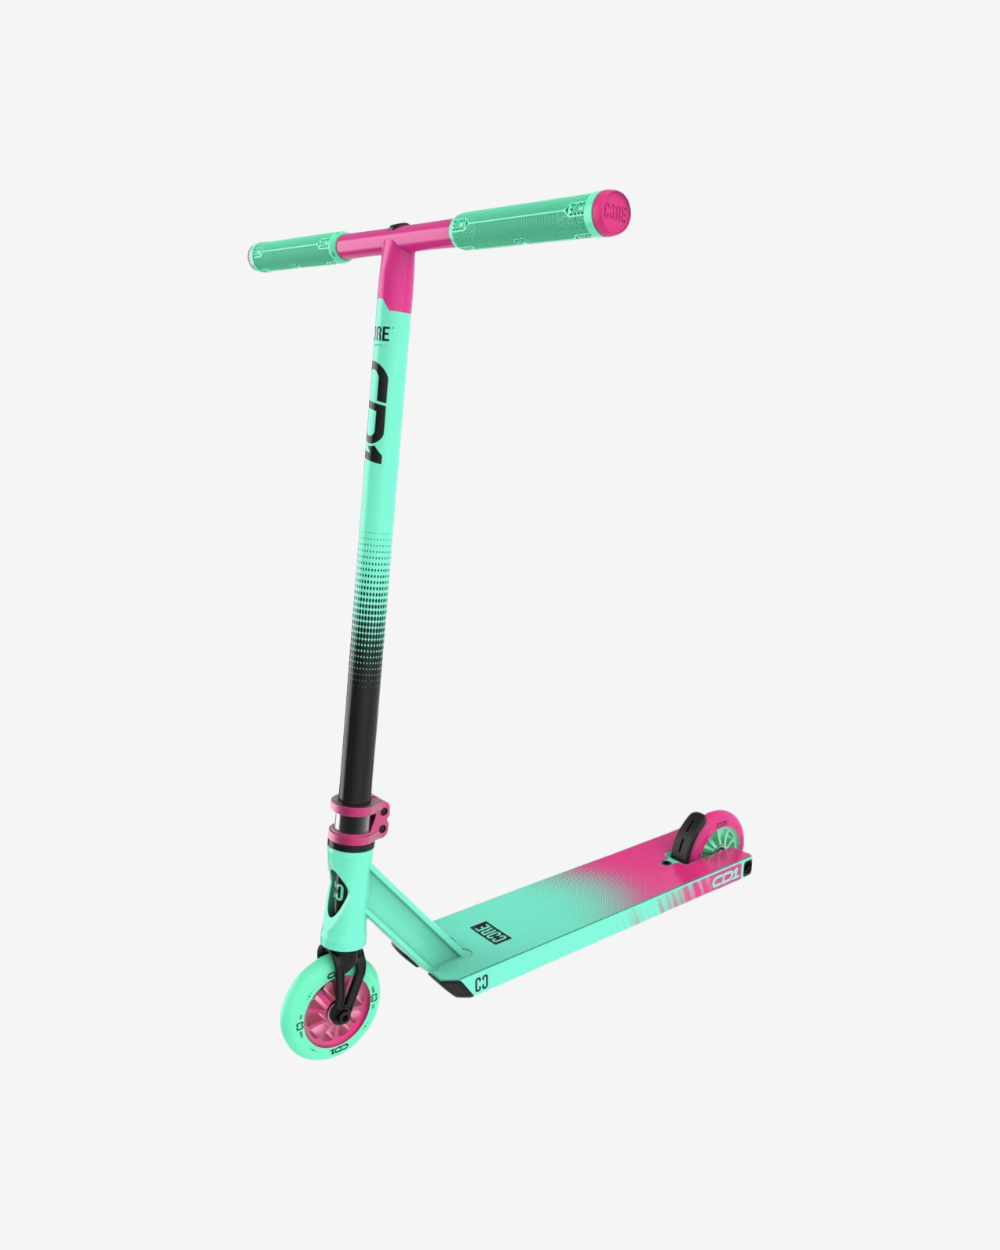 Core CD1 Complete Stunt Scooter | Teal / Pink